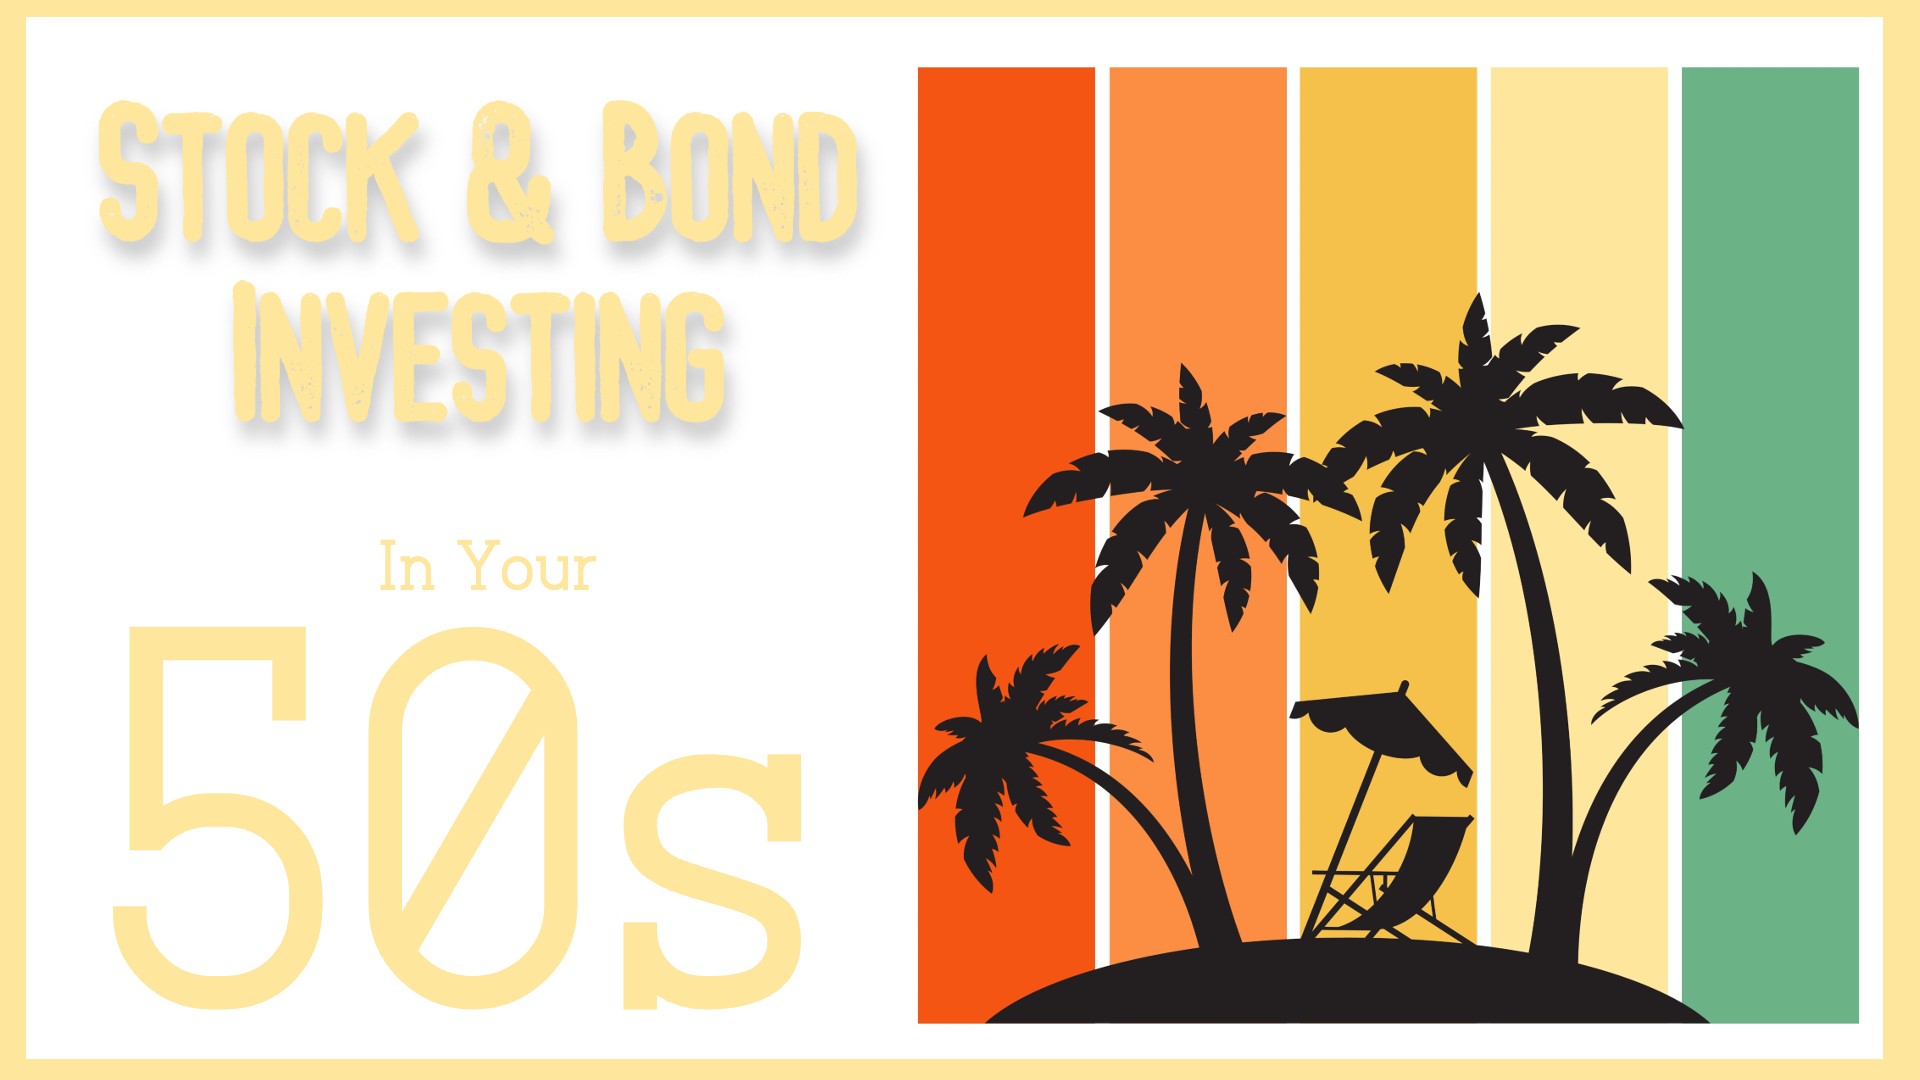 Stock and Bond Investing in Your 50s